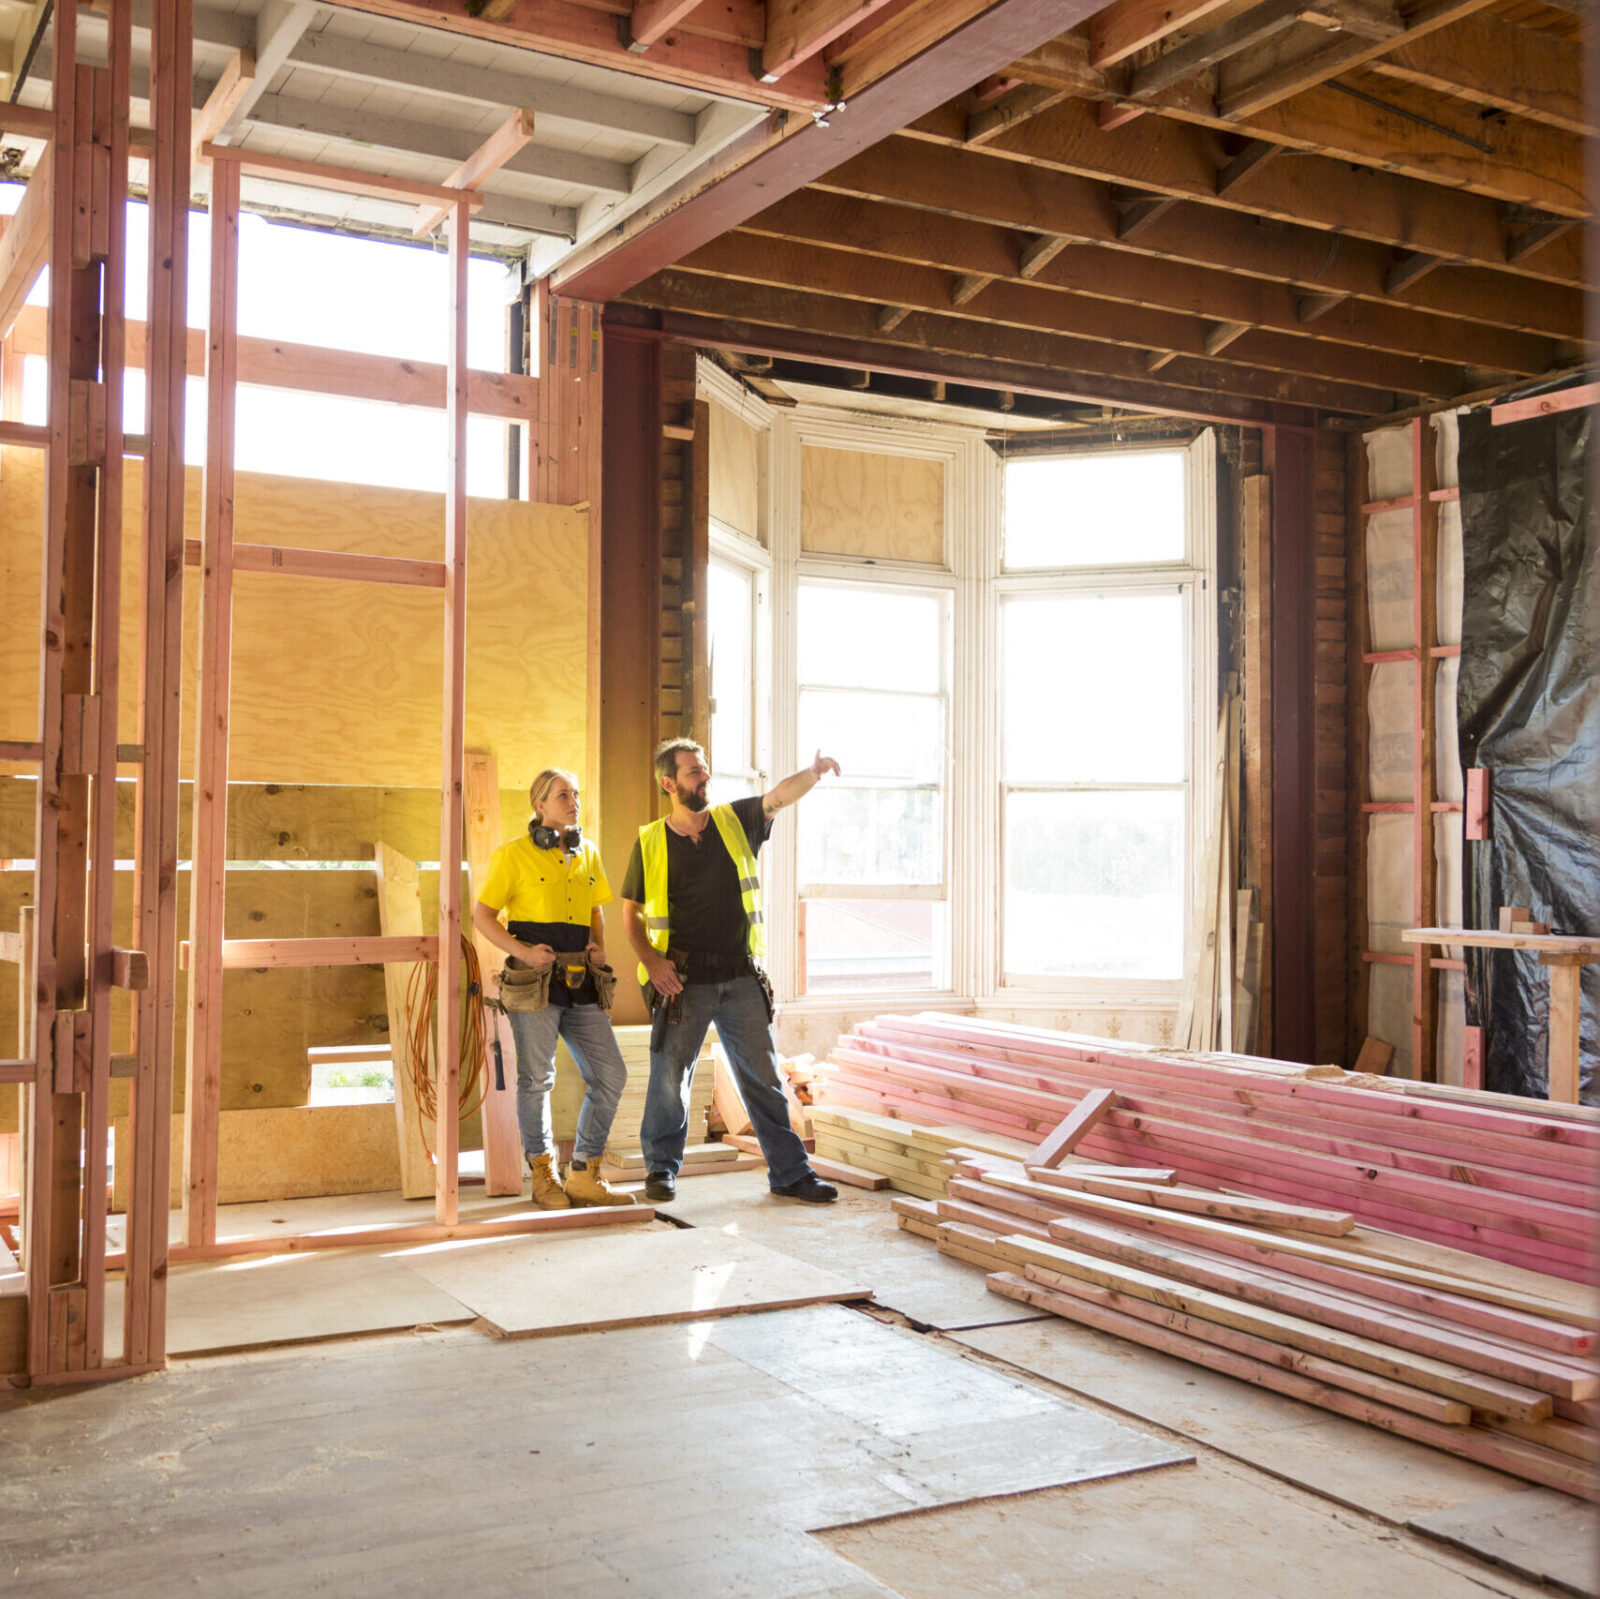 Two construction workers talk together inside large house under renovation